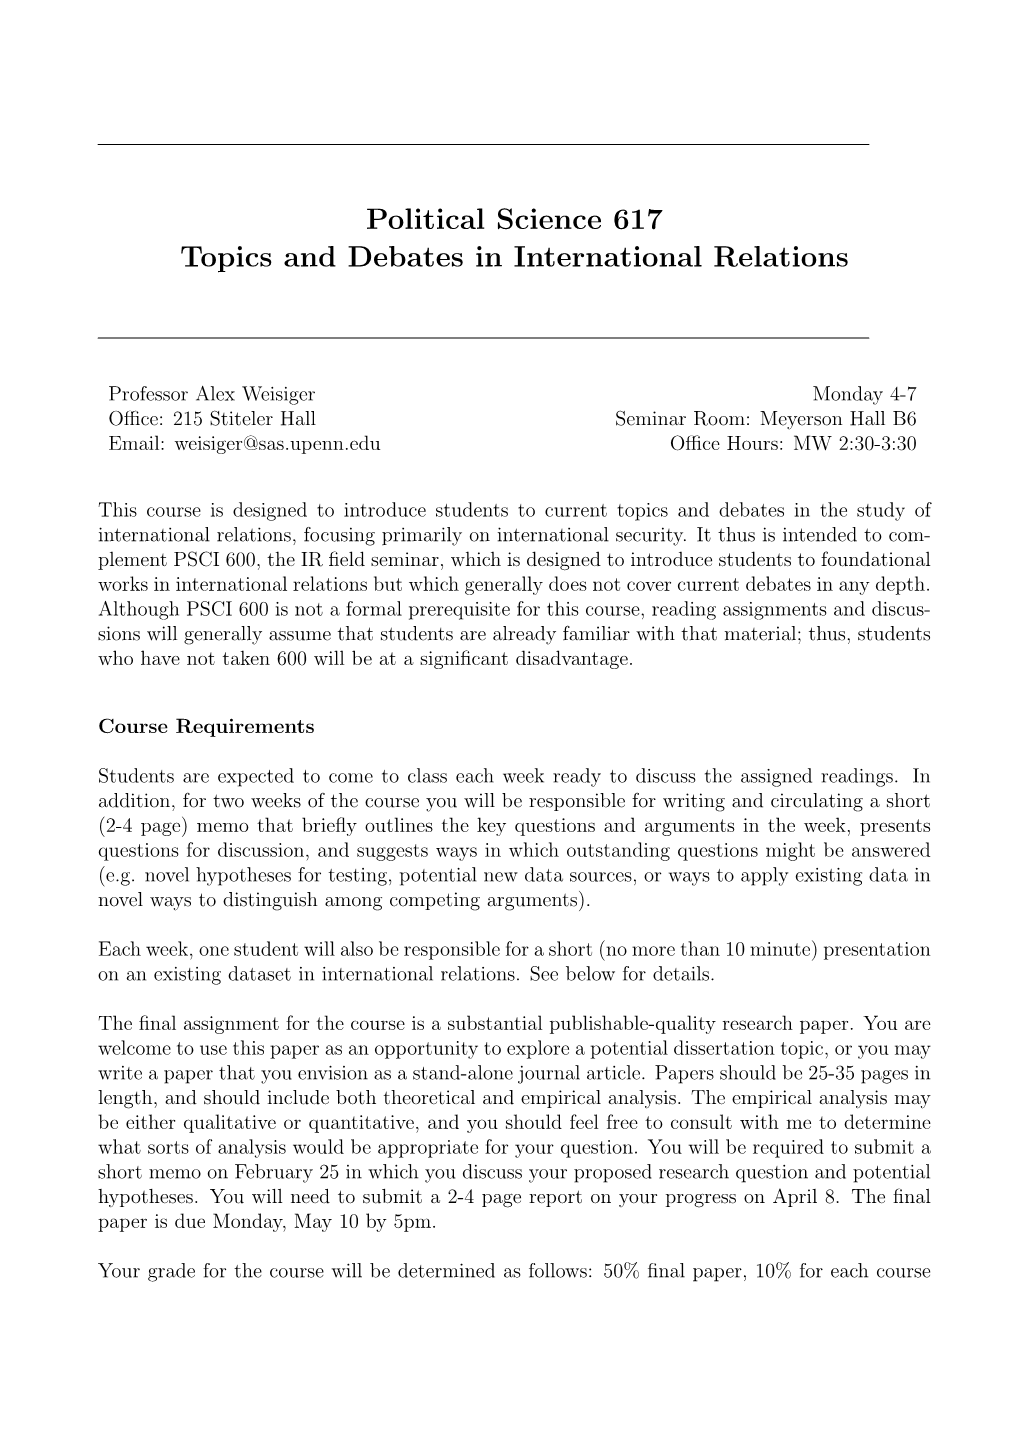 Political Science 617 Topics and Debates in International Relations